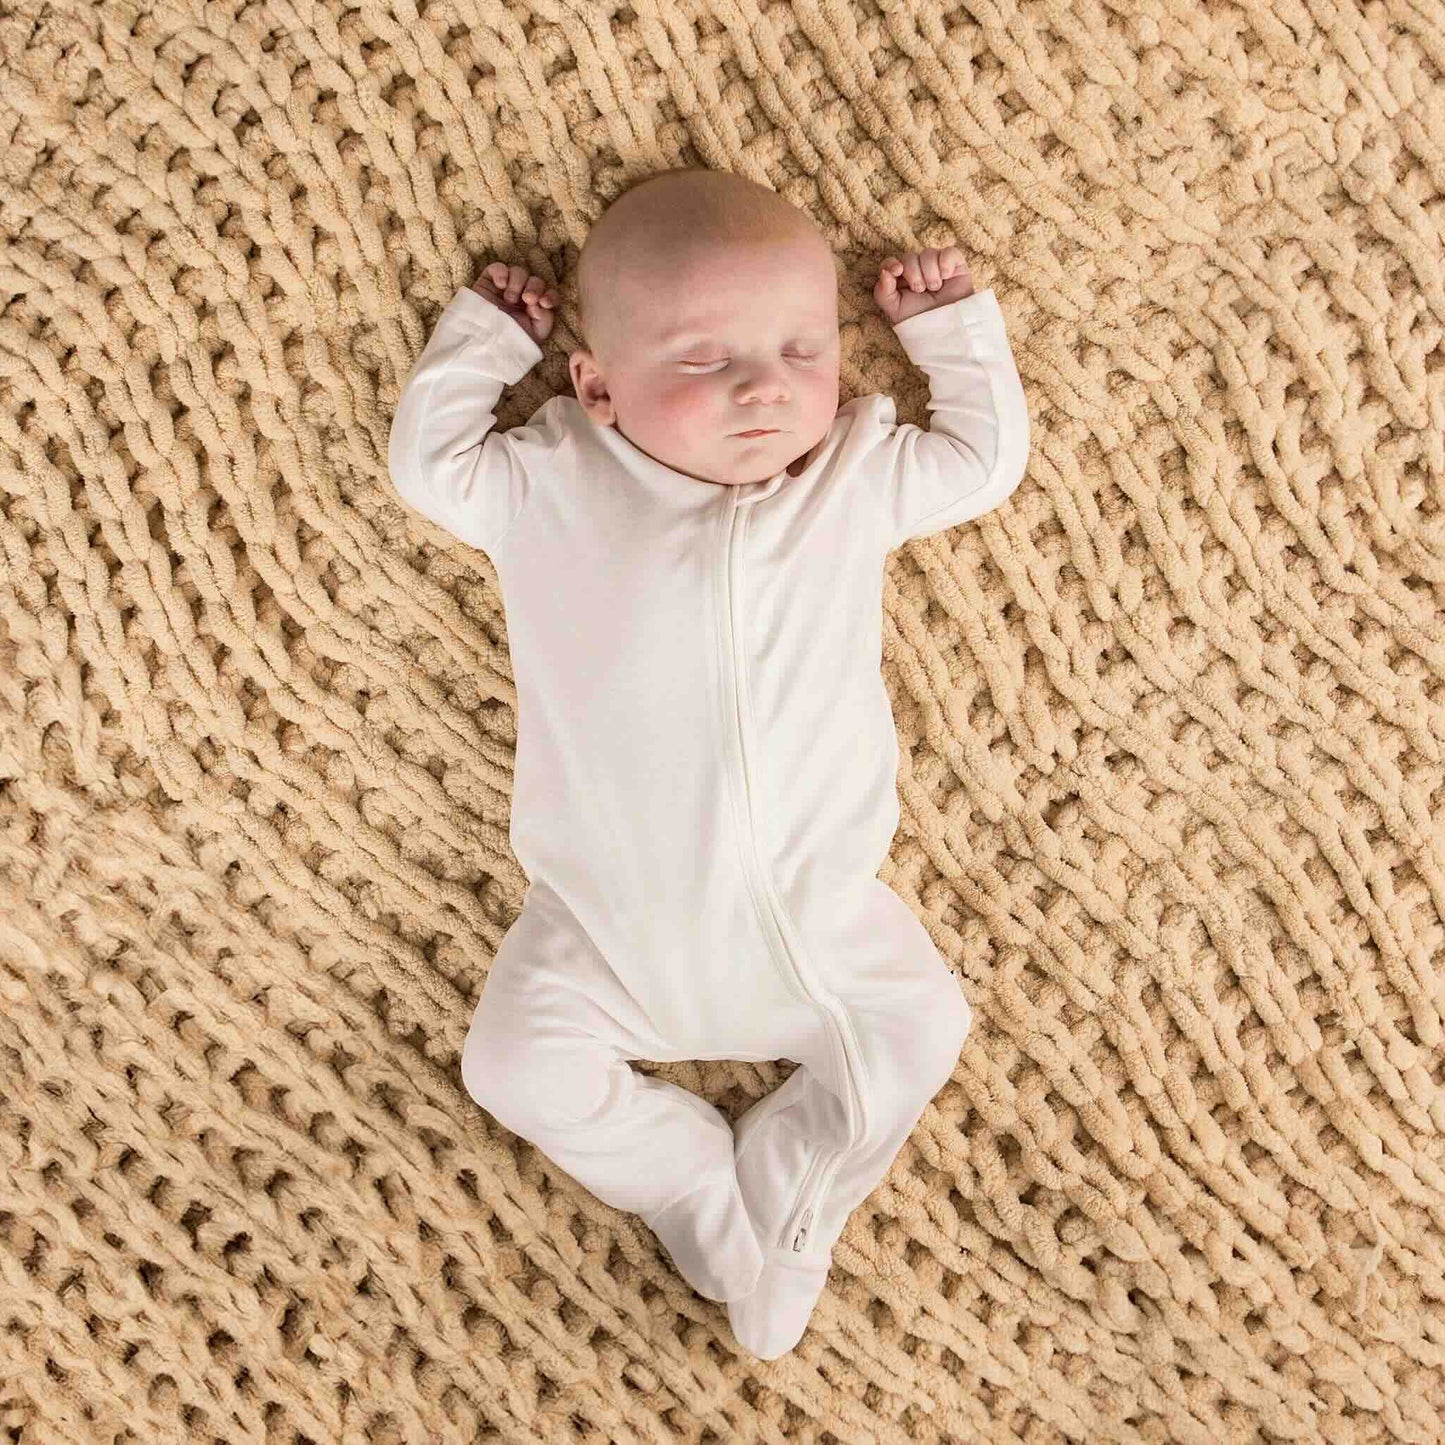 Baby less than 12 months old, laying down asleep wearing a nueborn white double zip sleepsuit